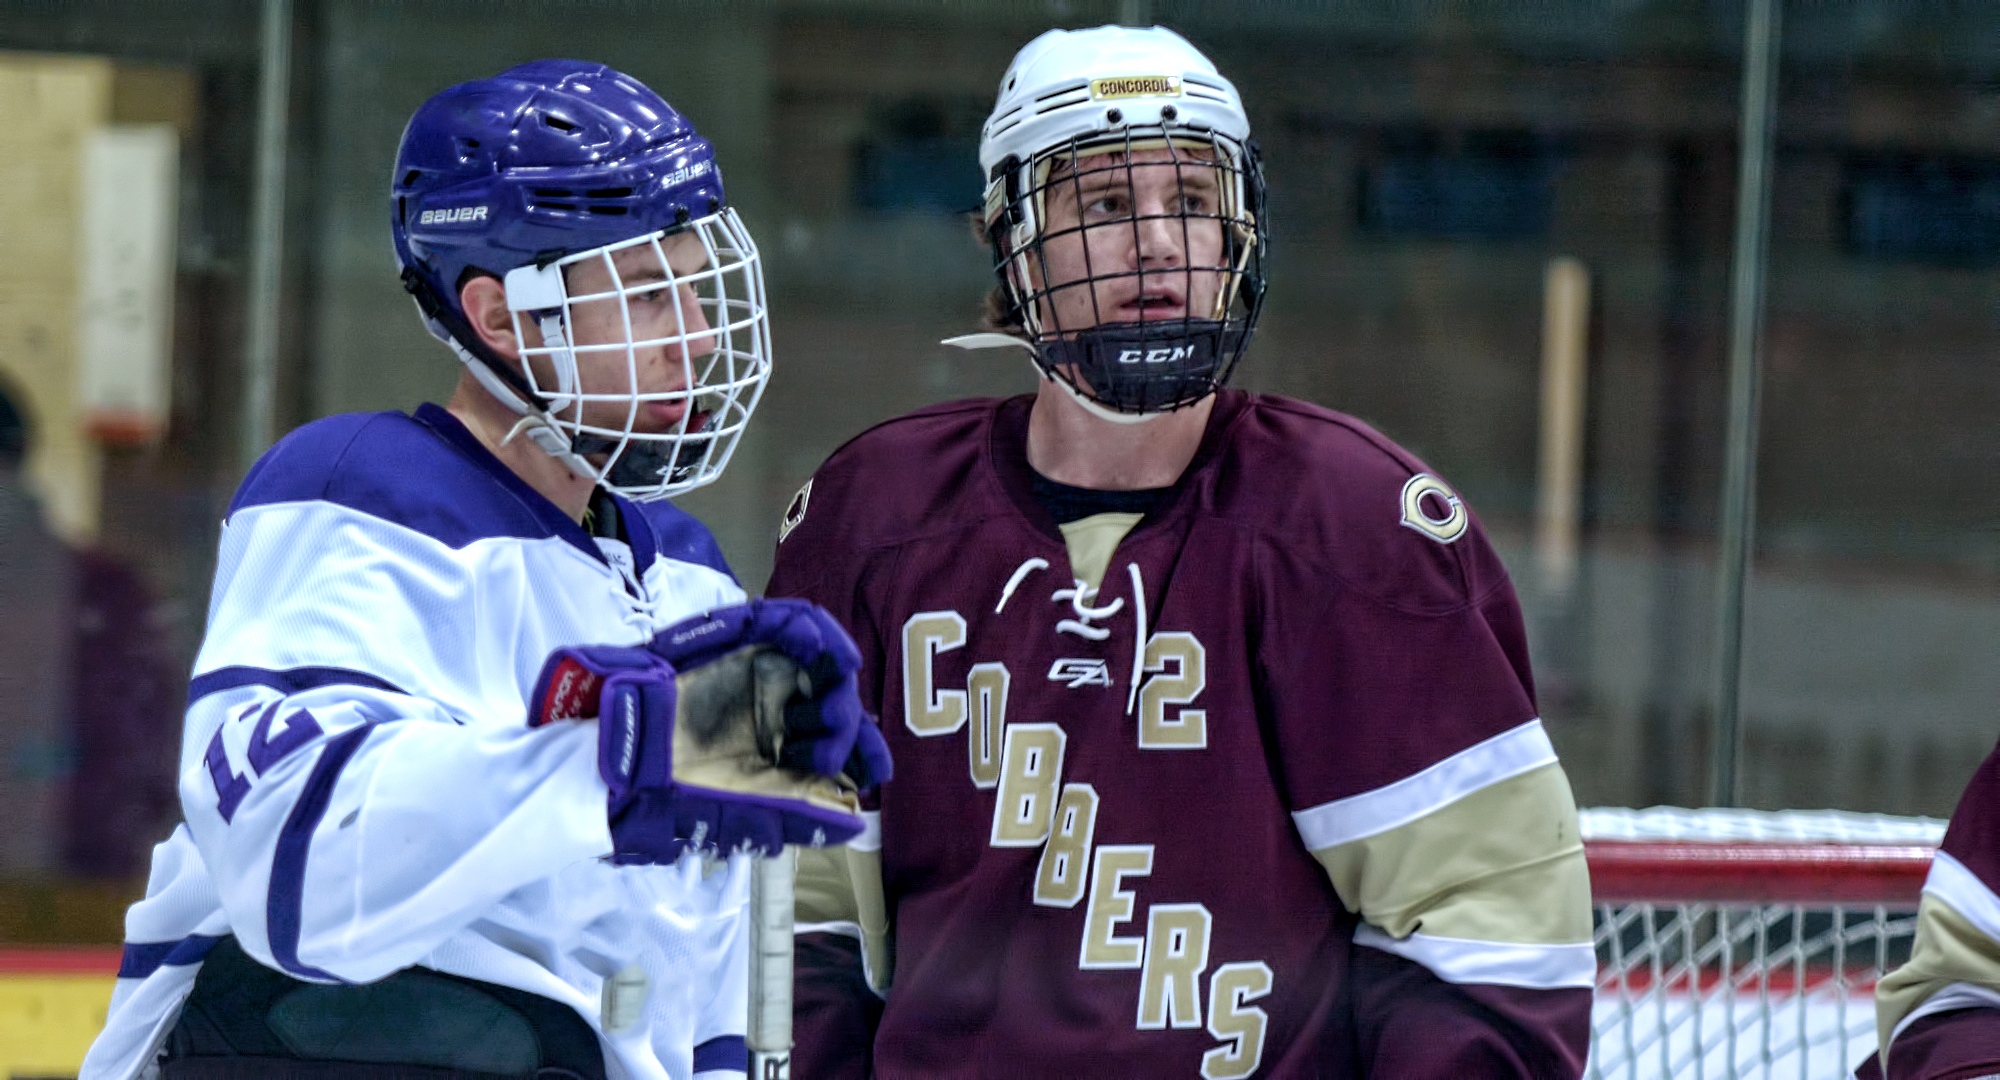 Freshman Alex Stoley scored the game-winning goal - his first collegiate tally - in the Cobbers' series opener at Gustavus.